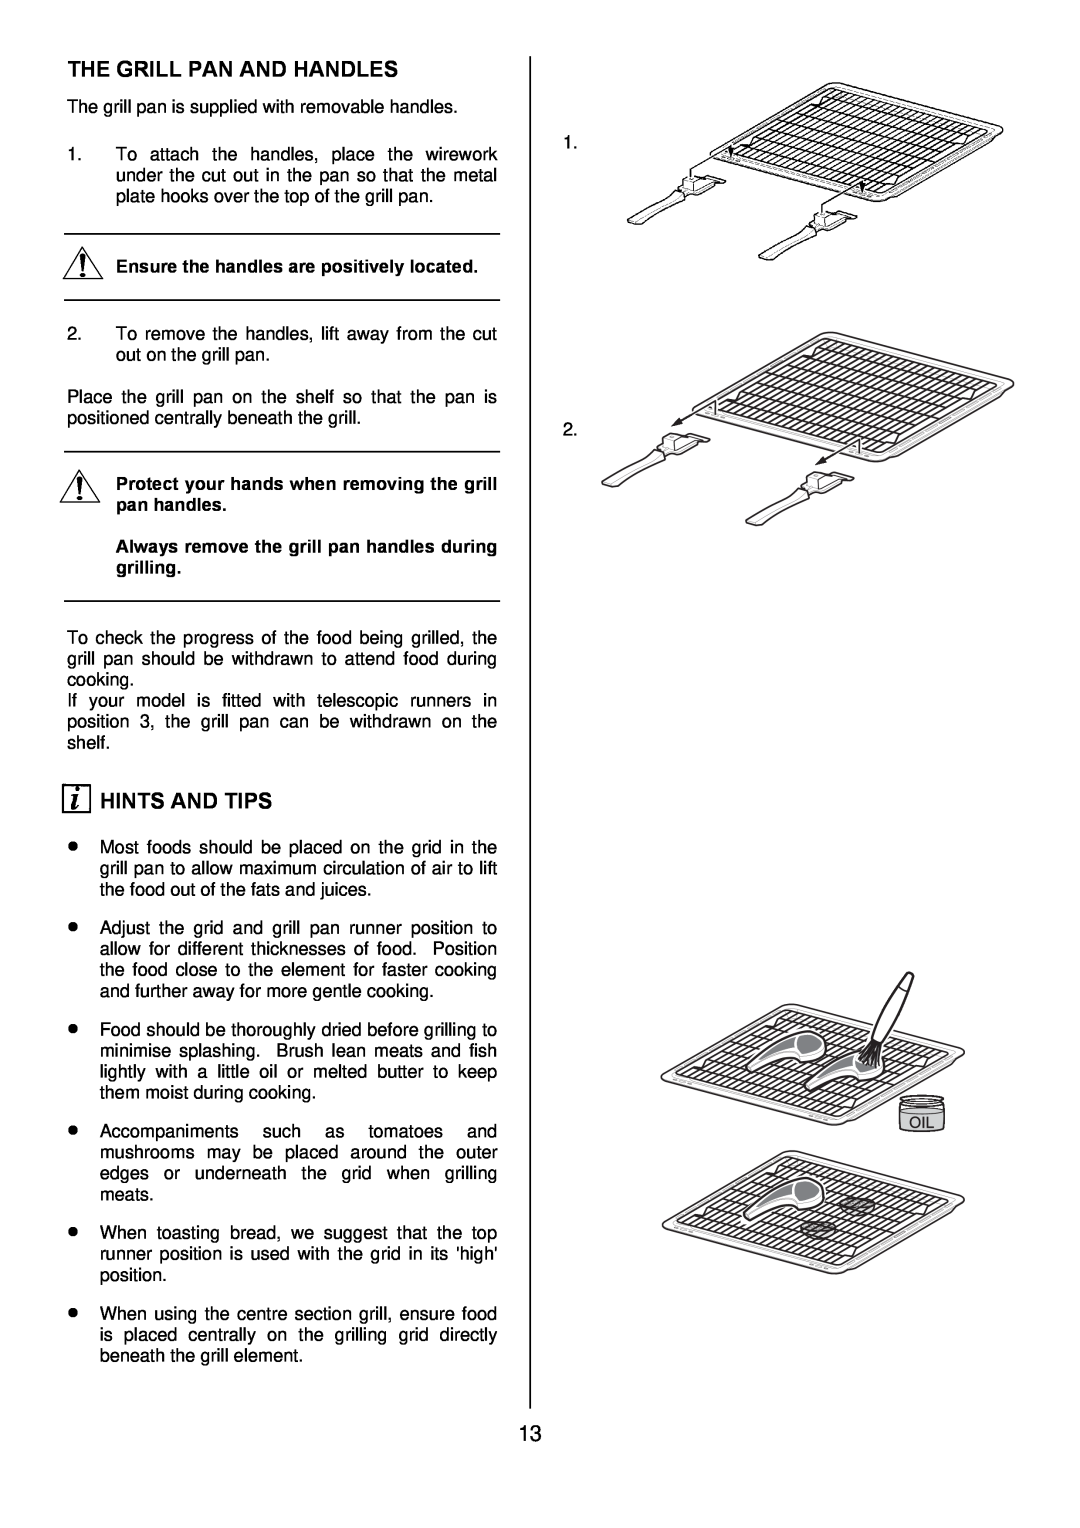 Zanussi ZOD 685 manual The Grill Pan And Handles, Hints And Tips, Ensure the handles are positively located 